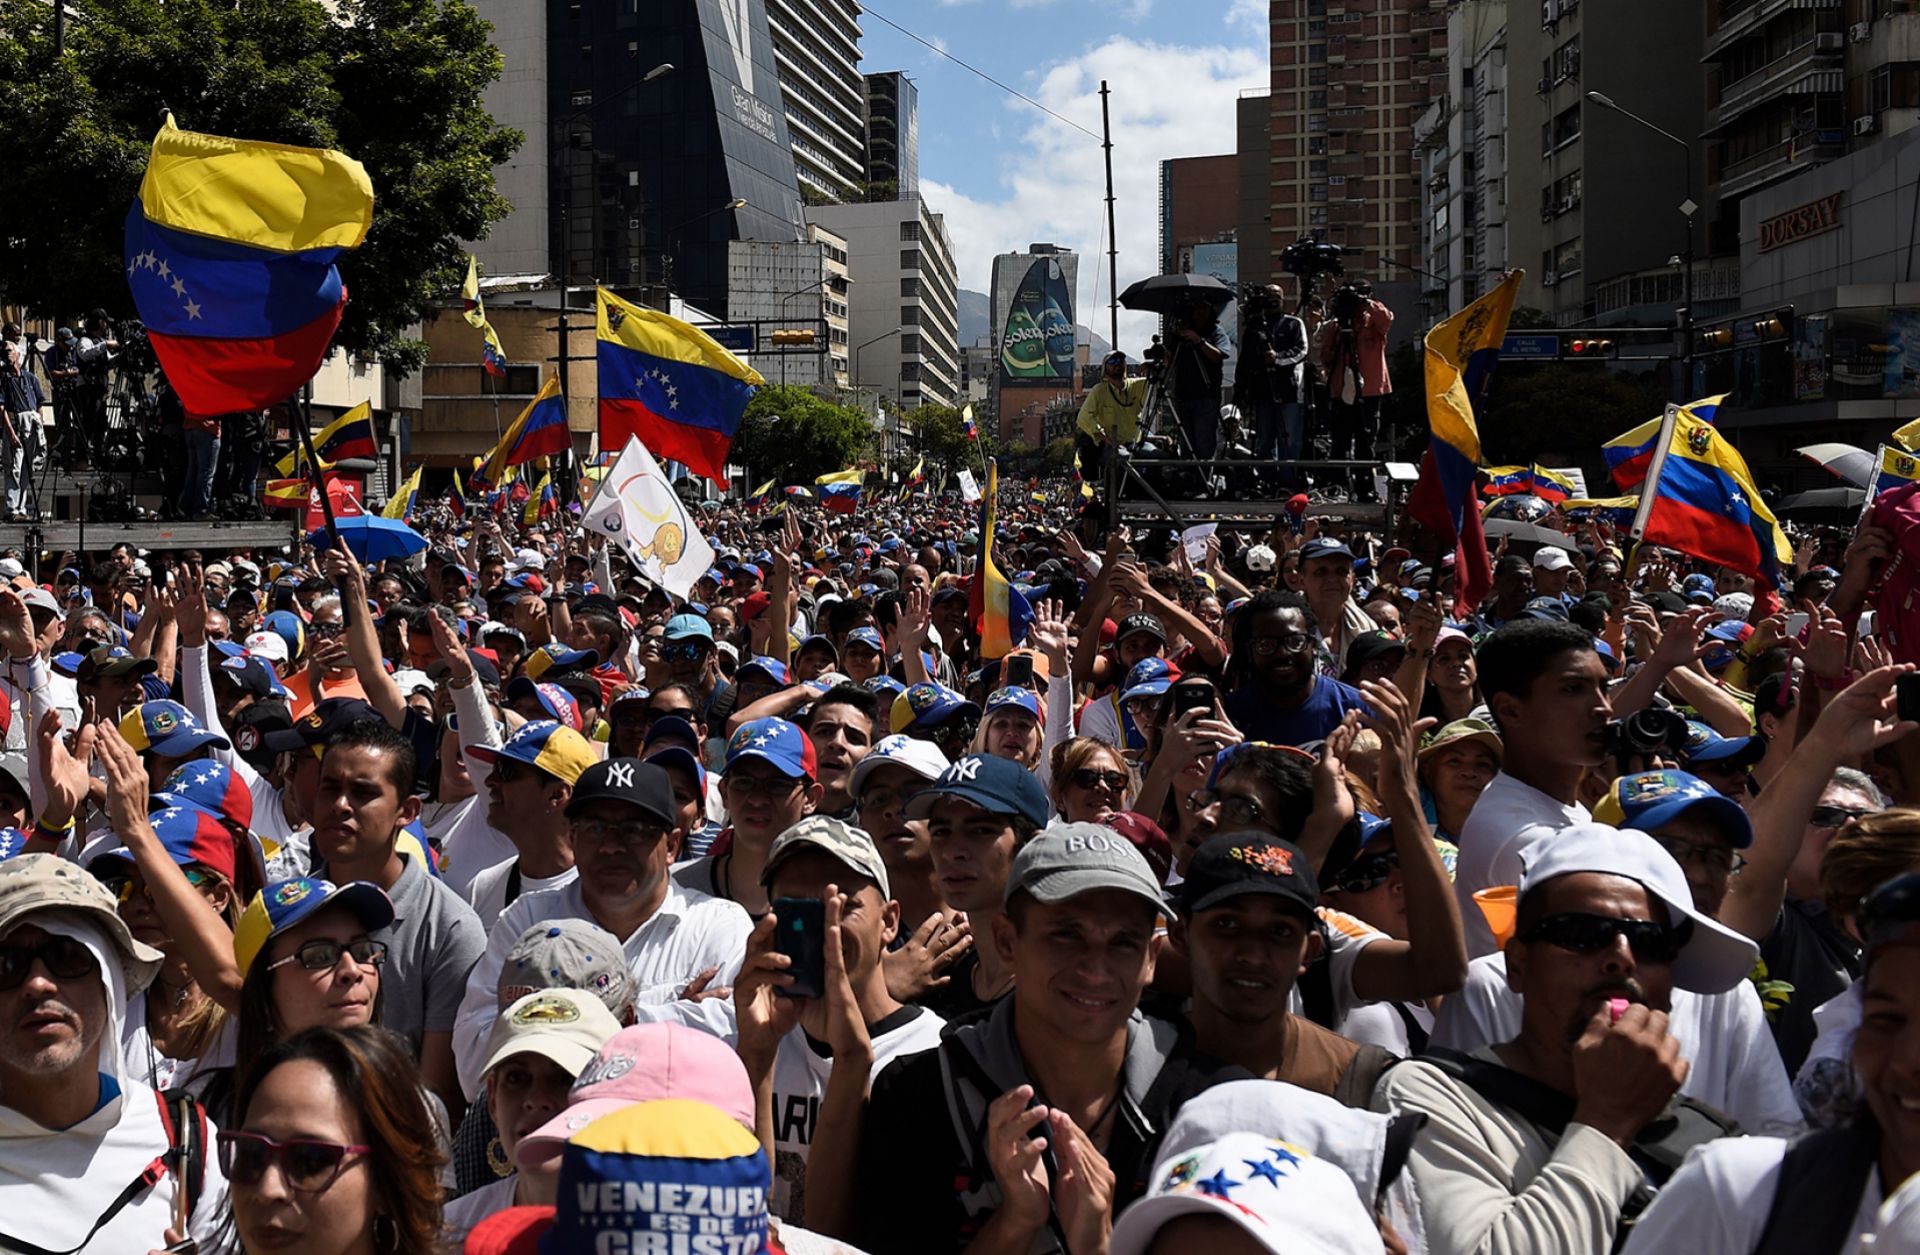 Supporters of Venezuelan opposition leader Juan Guaido take part in a rally to let in U.S. humanitarian aid, in Caracas on Feb. 12, 2019.